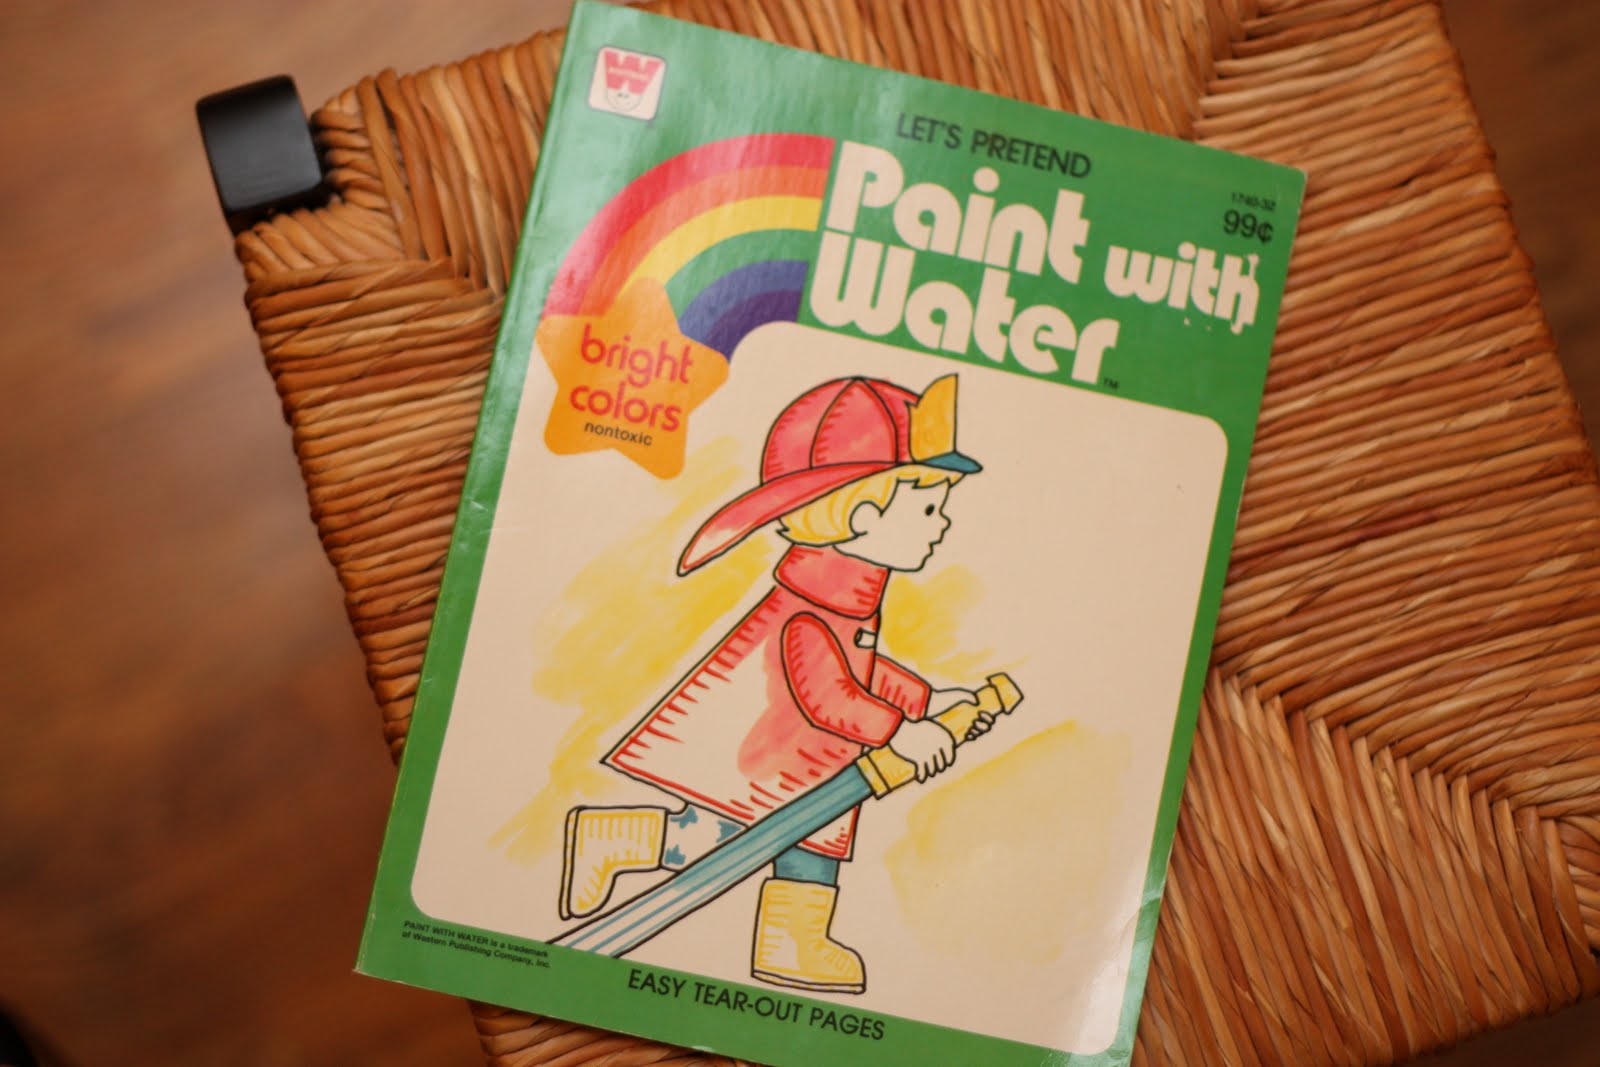 Coloring Book Using Water DIY "Paint with Water" Pages